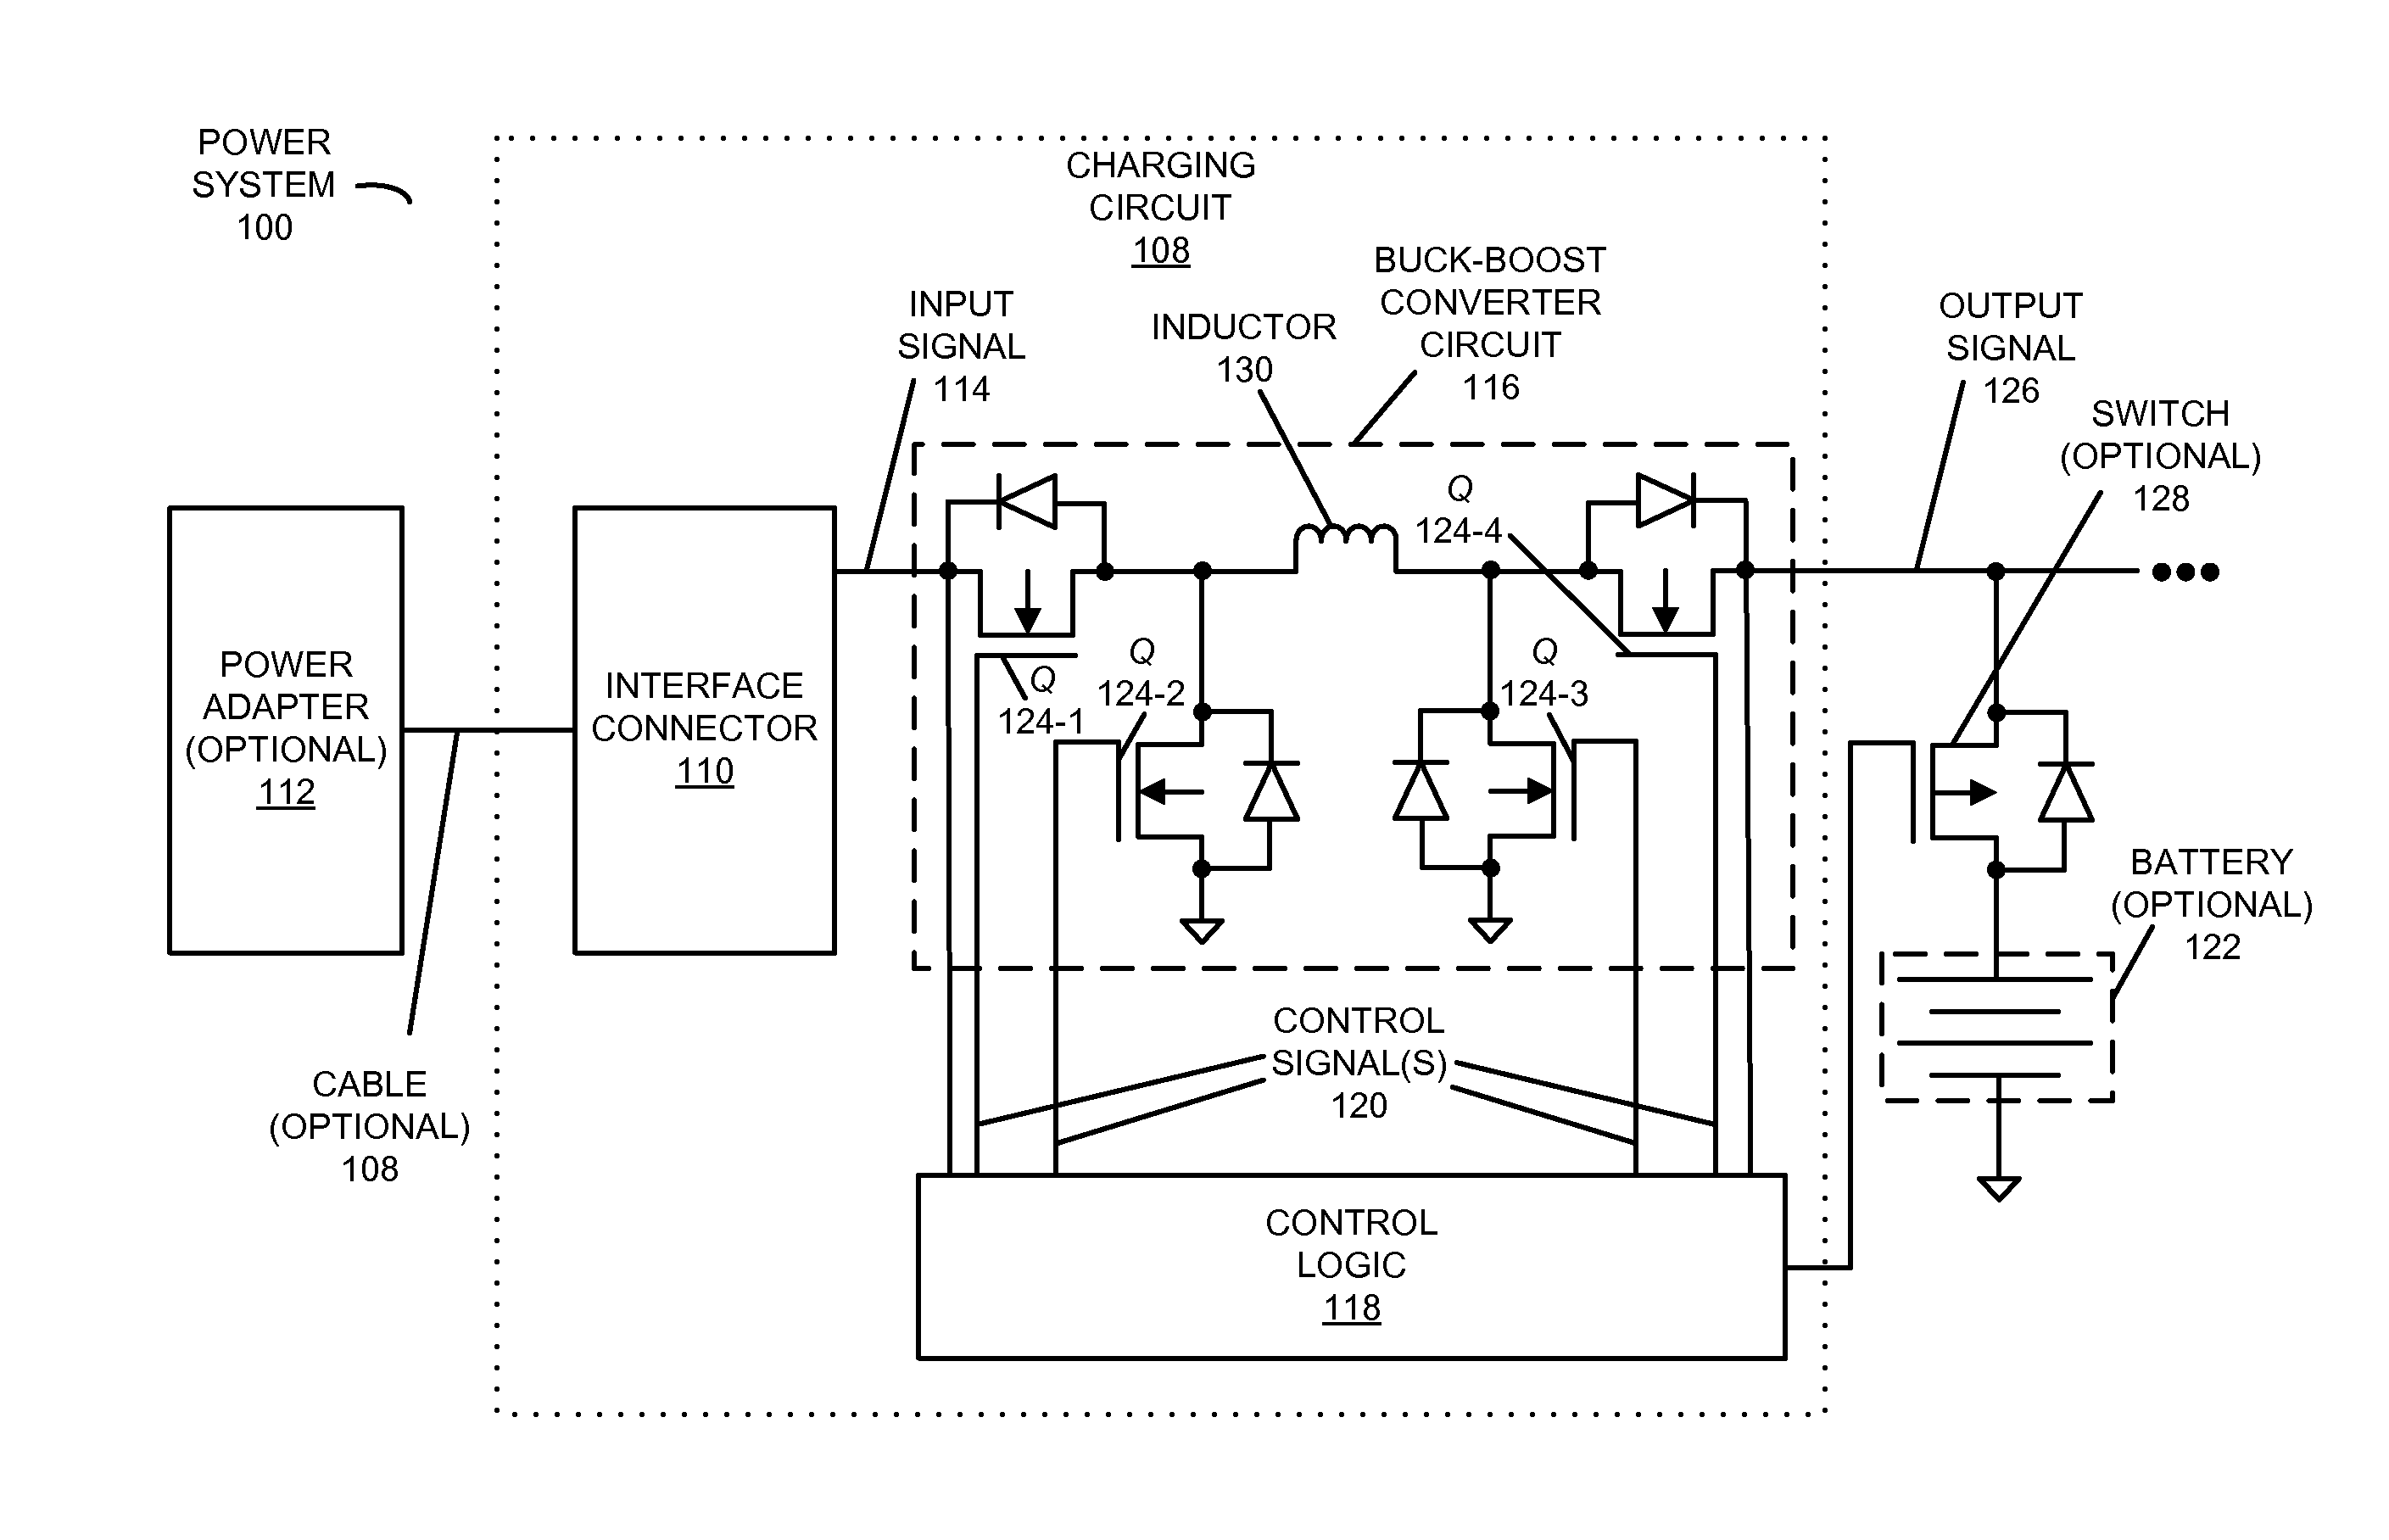 Reconfigurable compensator with large-signal stabilizing network